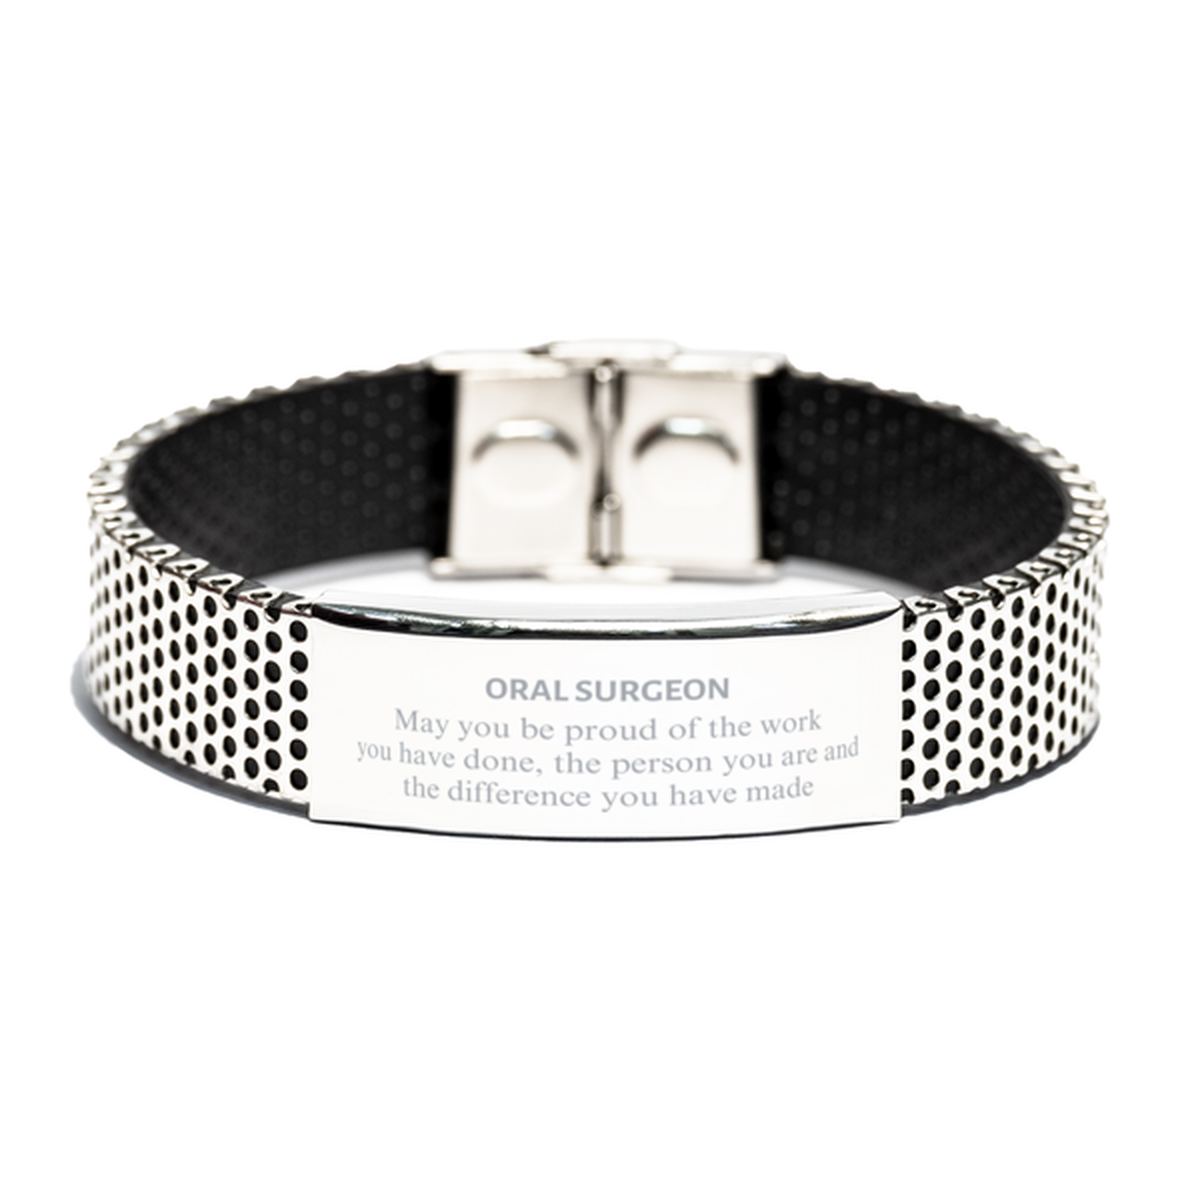 Oral Surgeon May you be proud of the work you have done, Retirement Oral Surgeon Stainless Steel Bracelet for Colleague Appreciation Gifts Amazing for Oral Surgeon